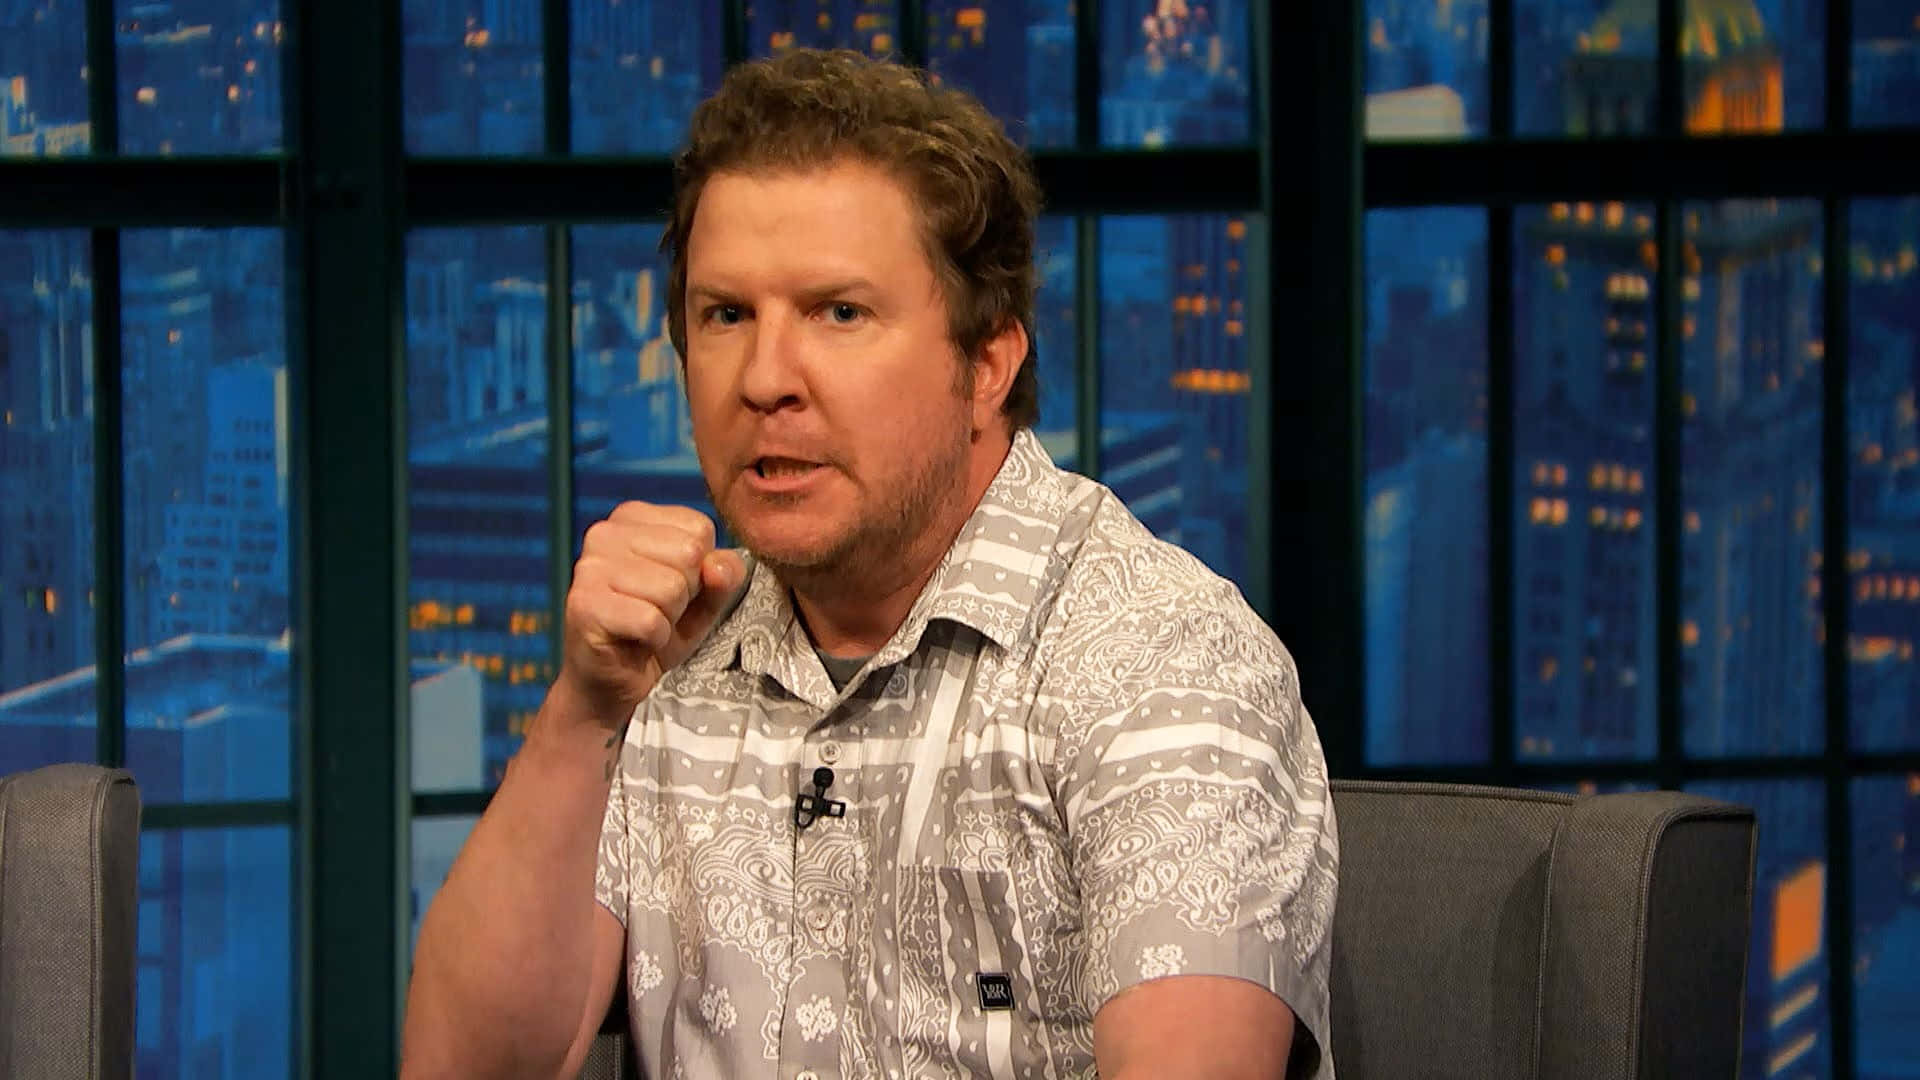 Comedian Nick Swardson takes a break from performing Wallpaper